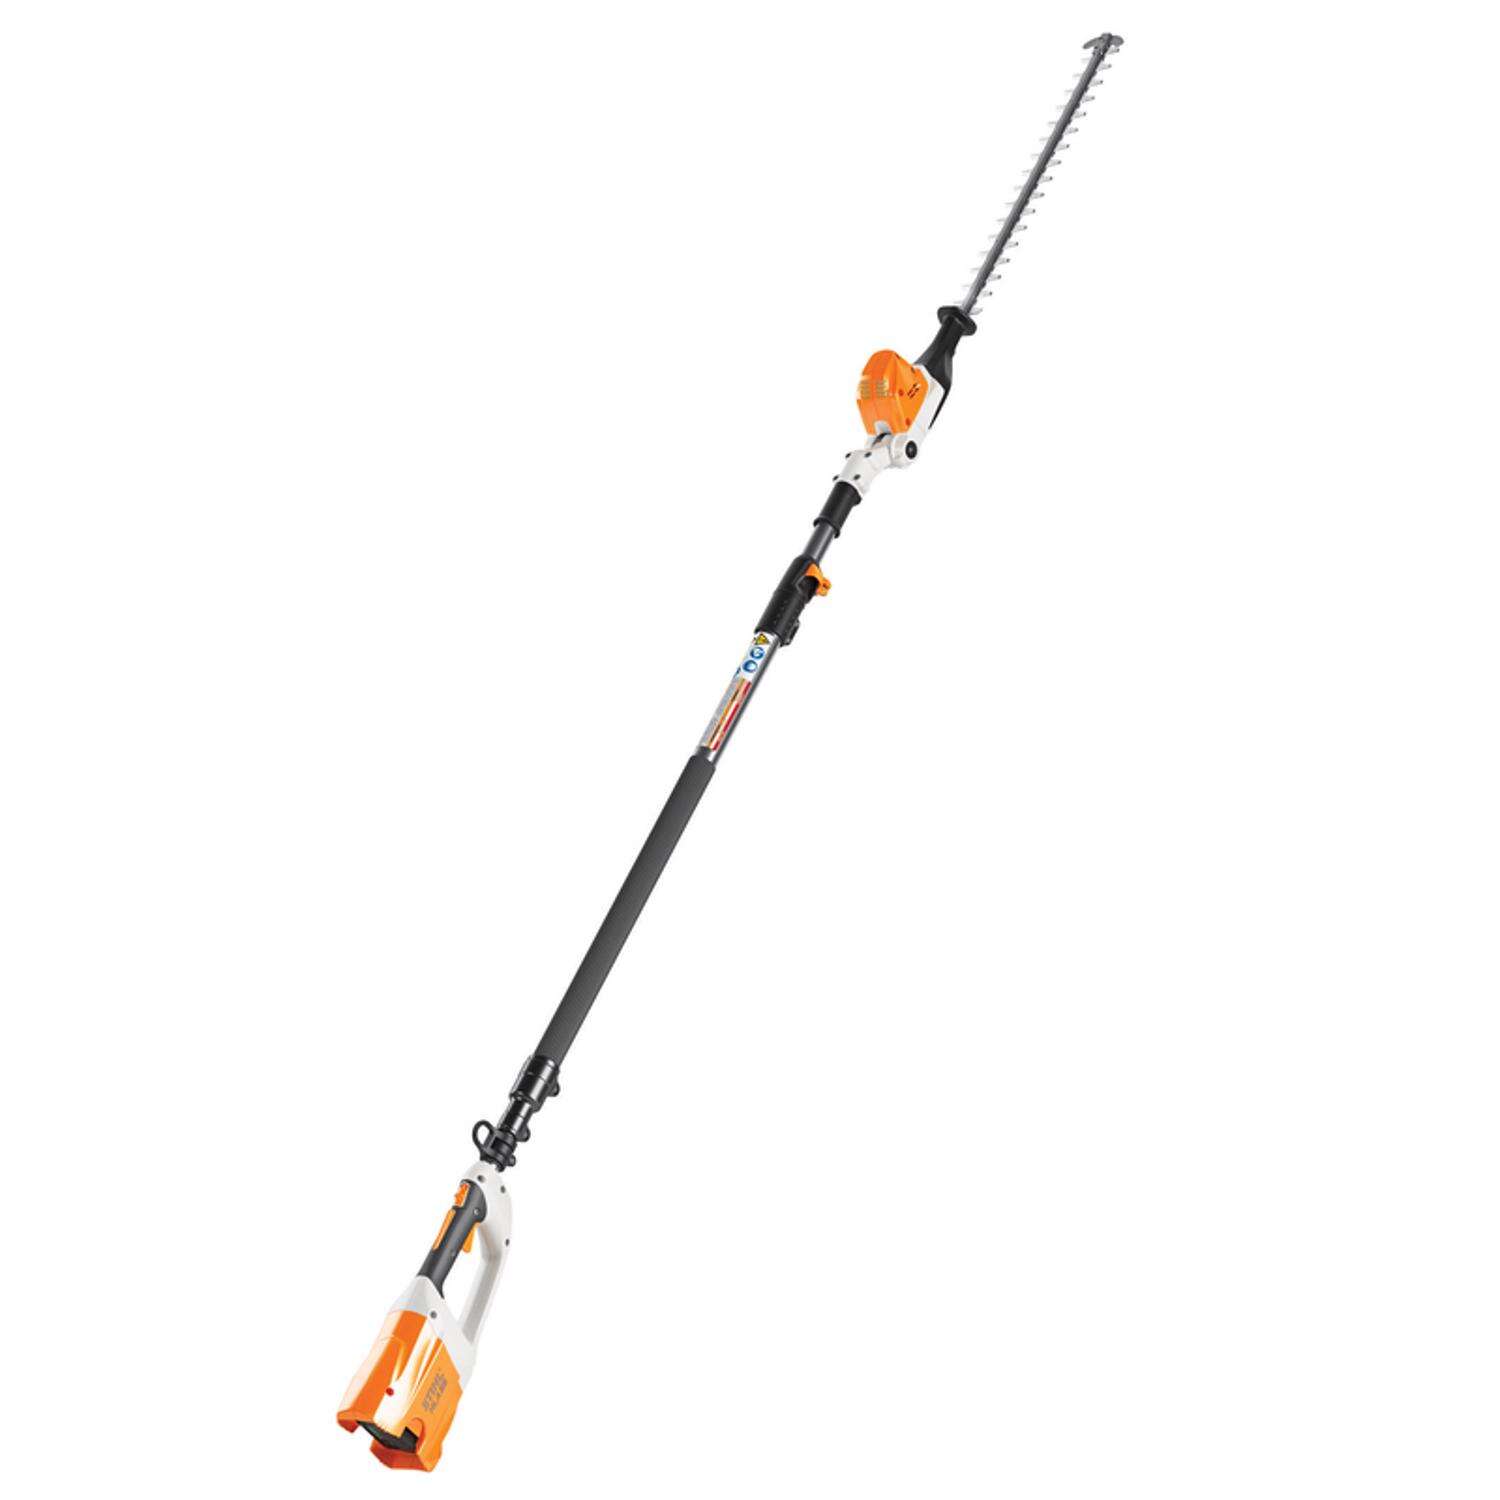 STIHL HLA 85 20 in. 36 V Battery Hedge Trimmer Tool Only